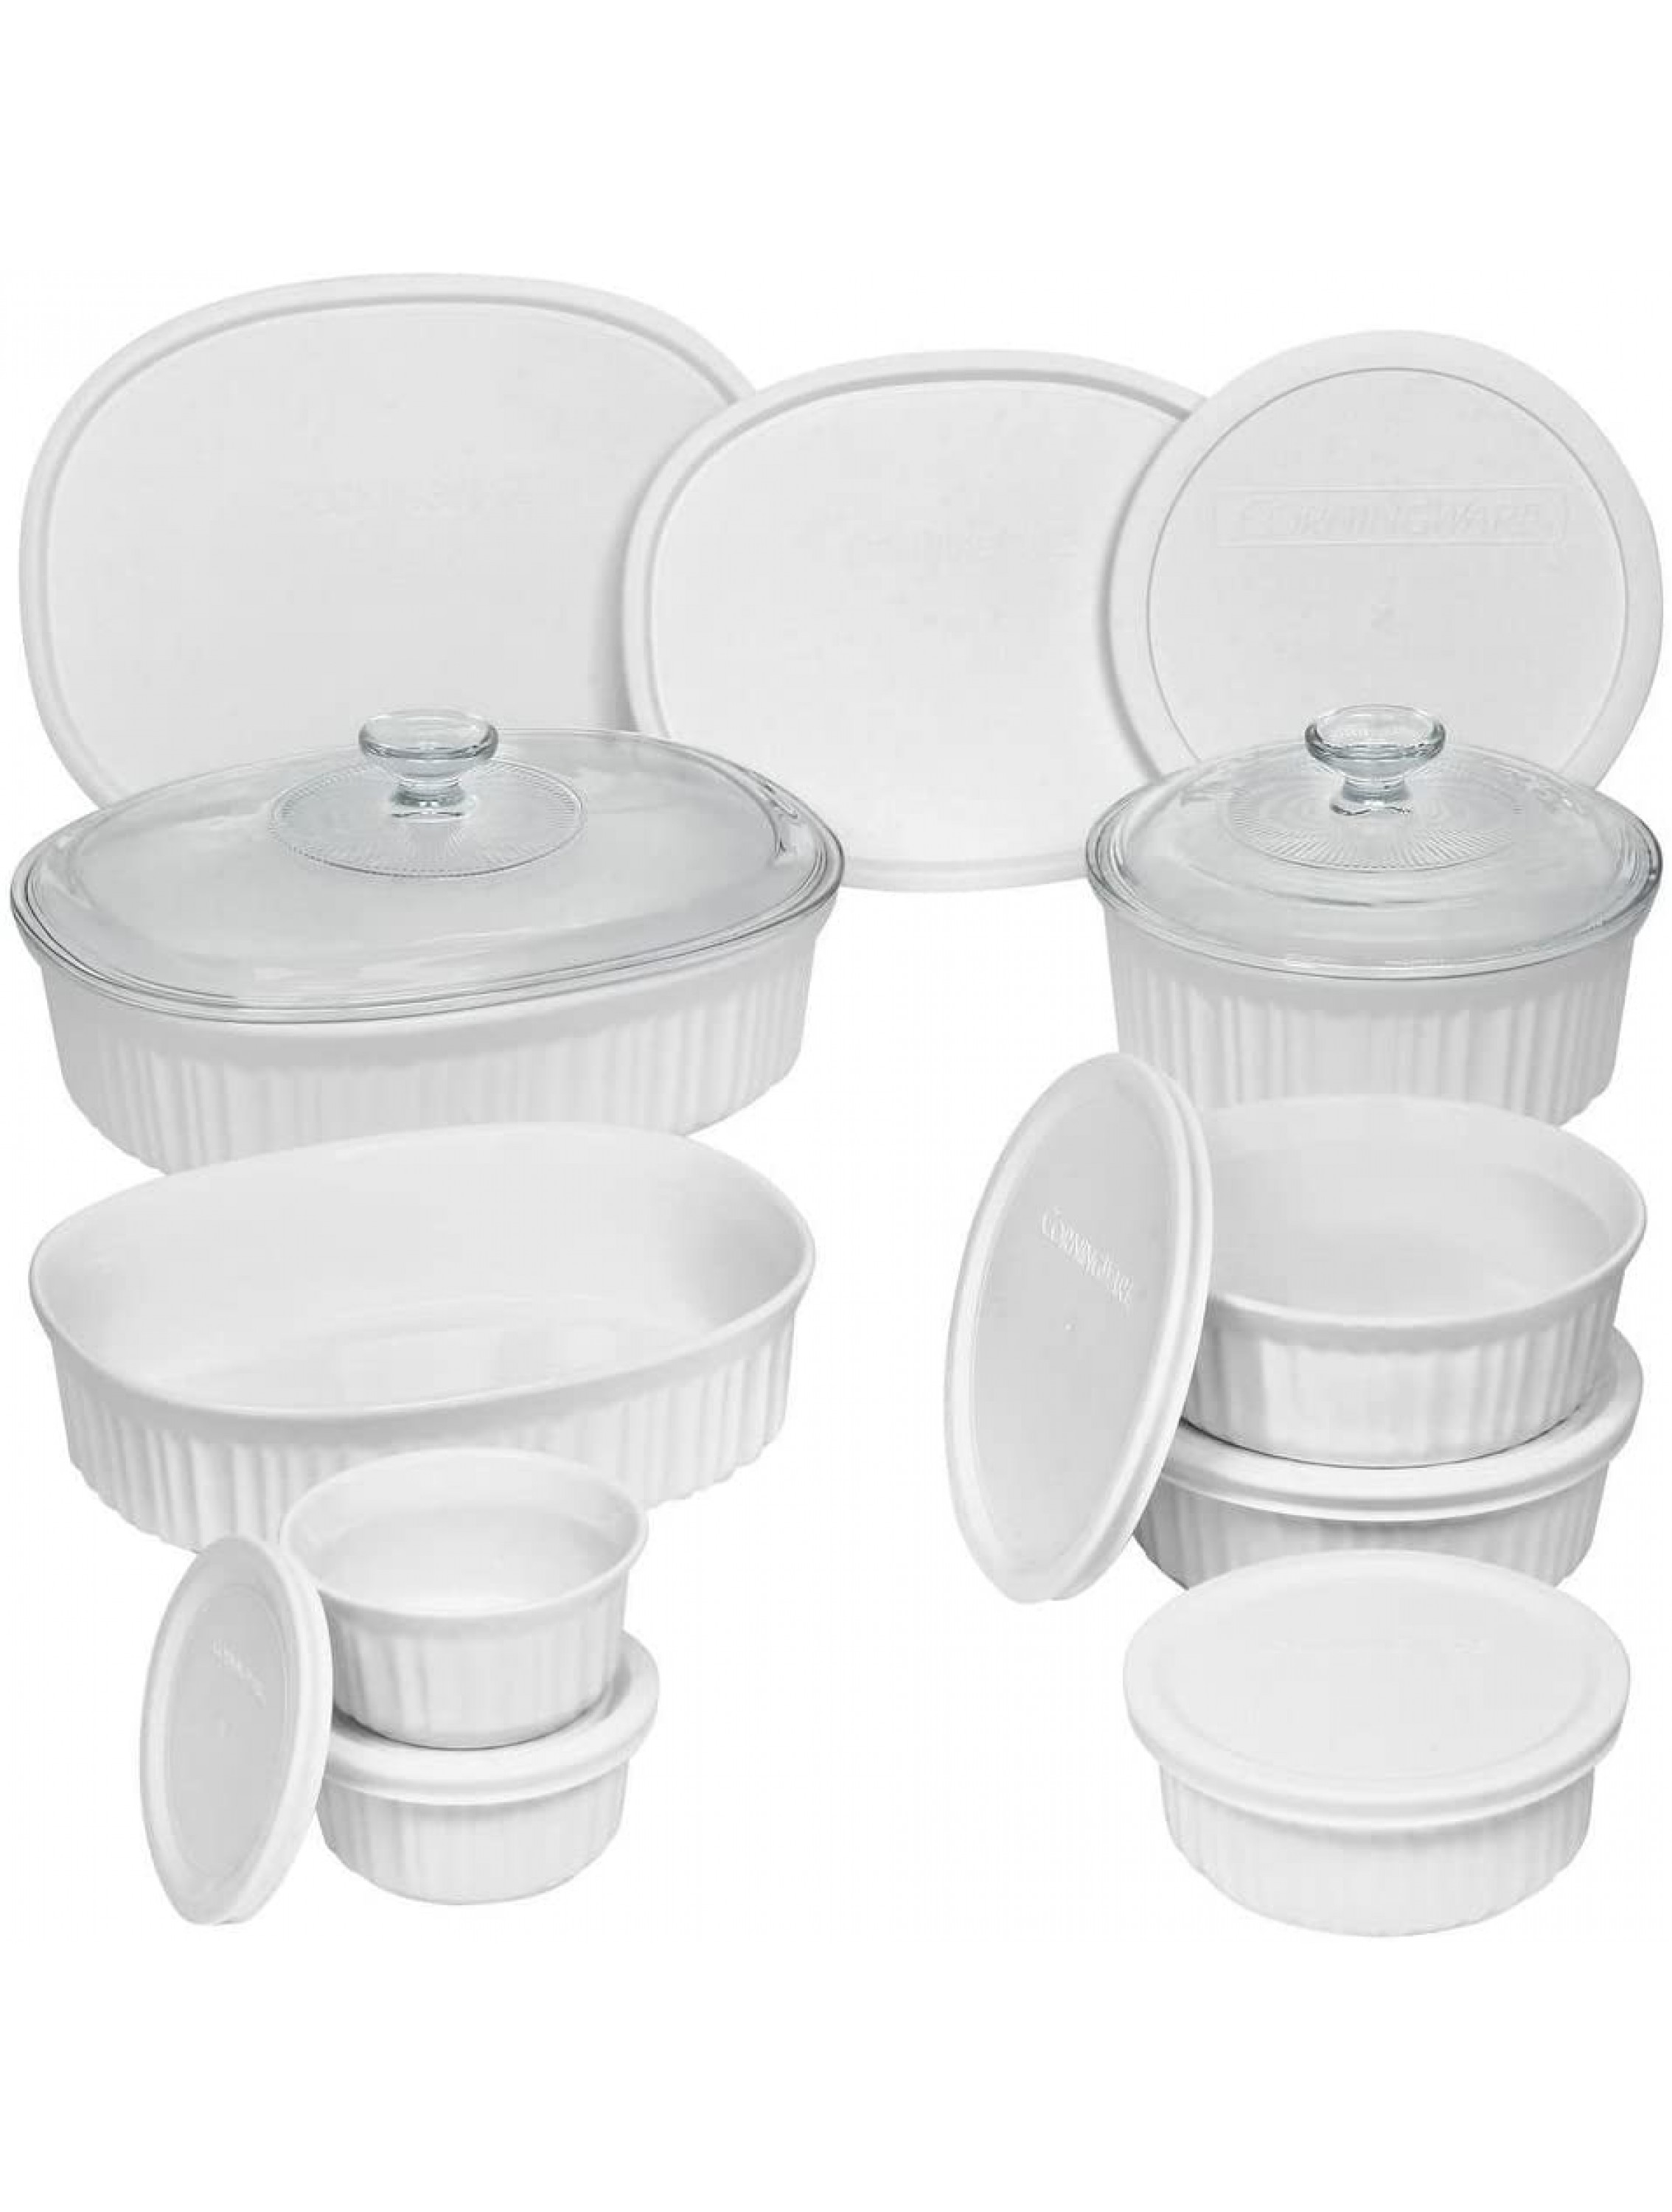 Durable Non-Porous French White 18 Piece Ceramic Made and Oven and Microwave Safe Bakeware Set with Lid by CorningWare - B3I407TST